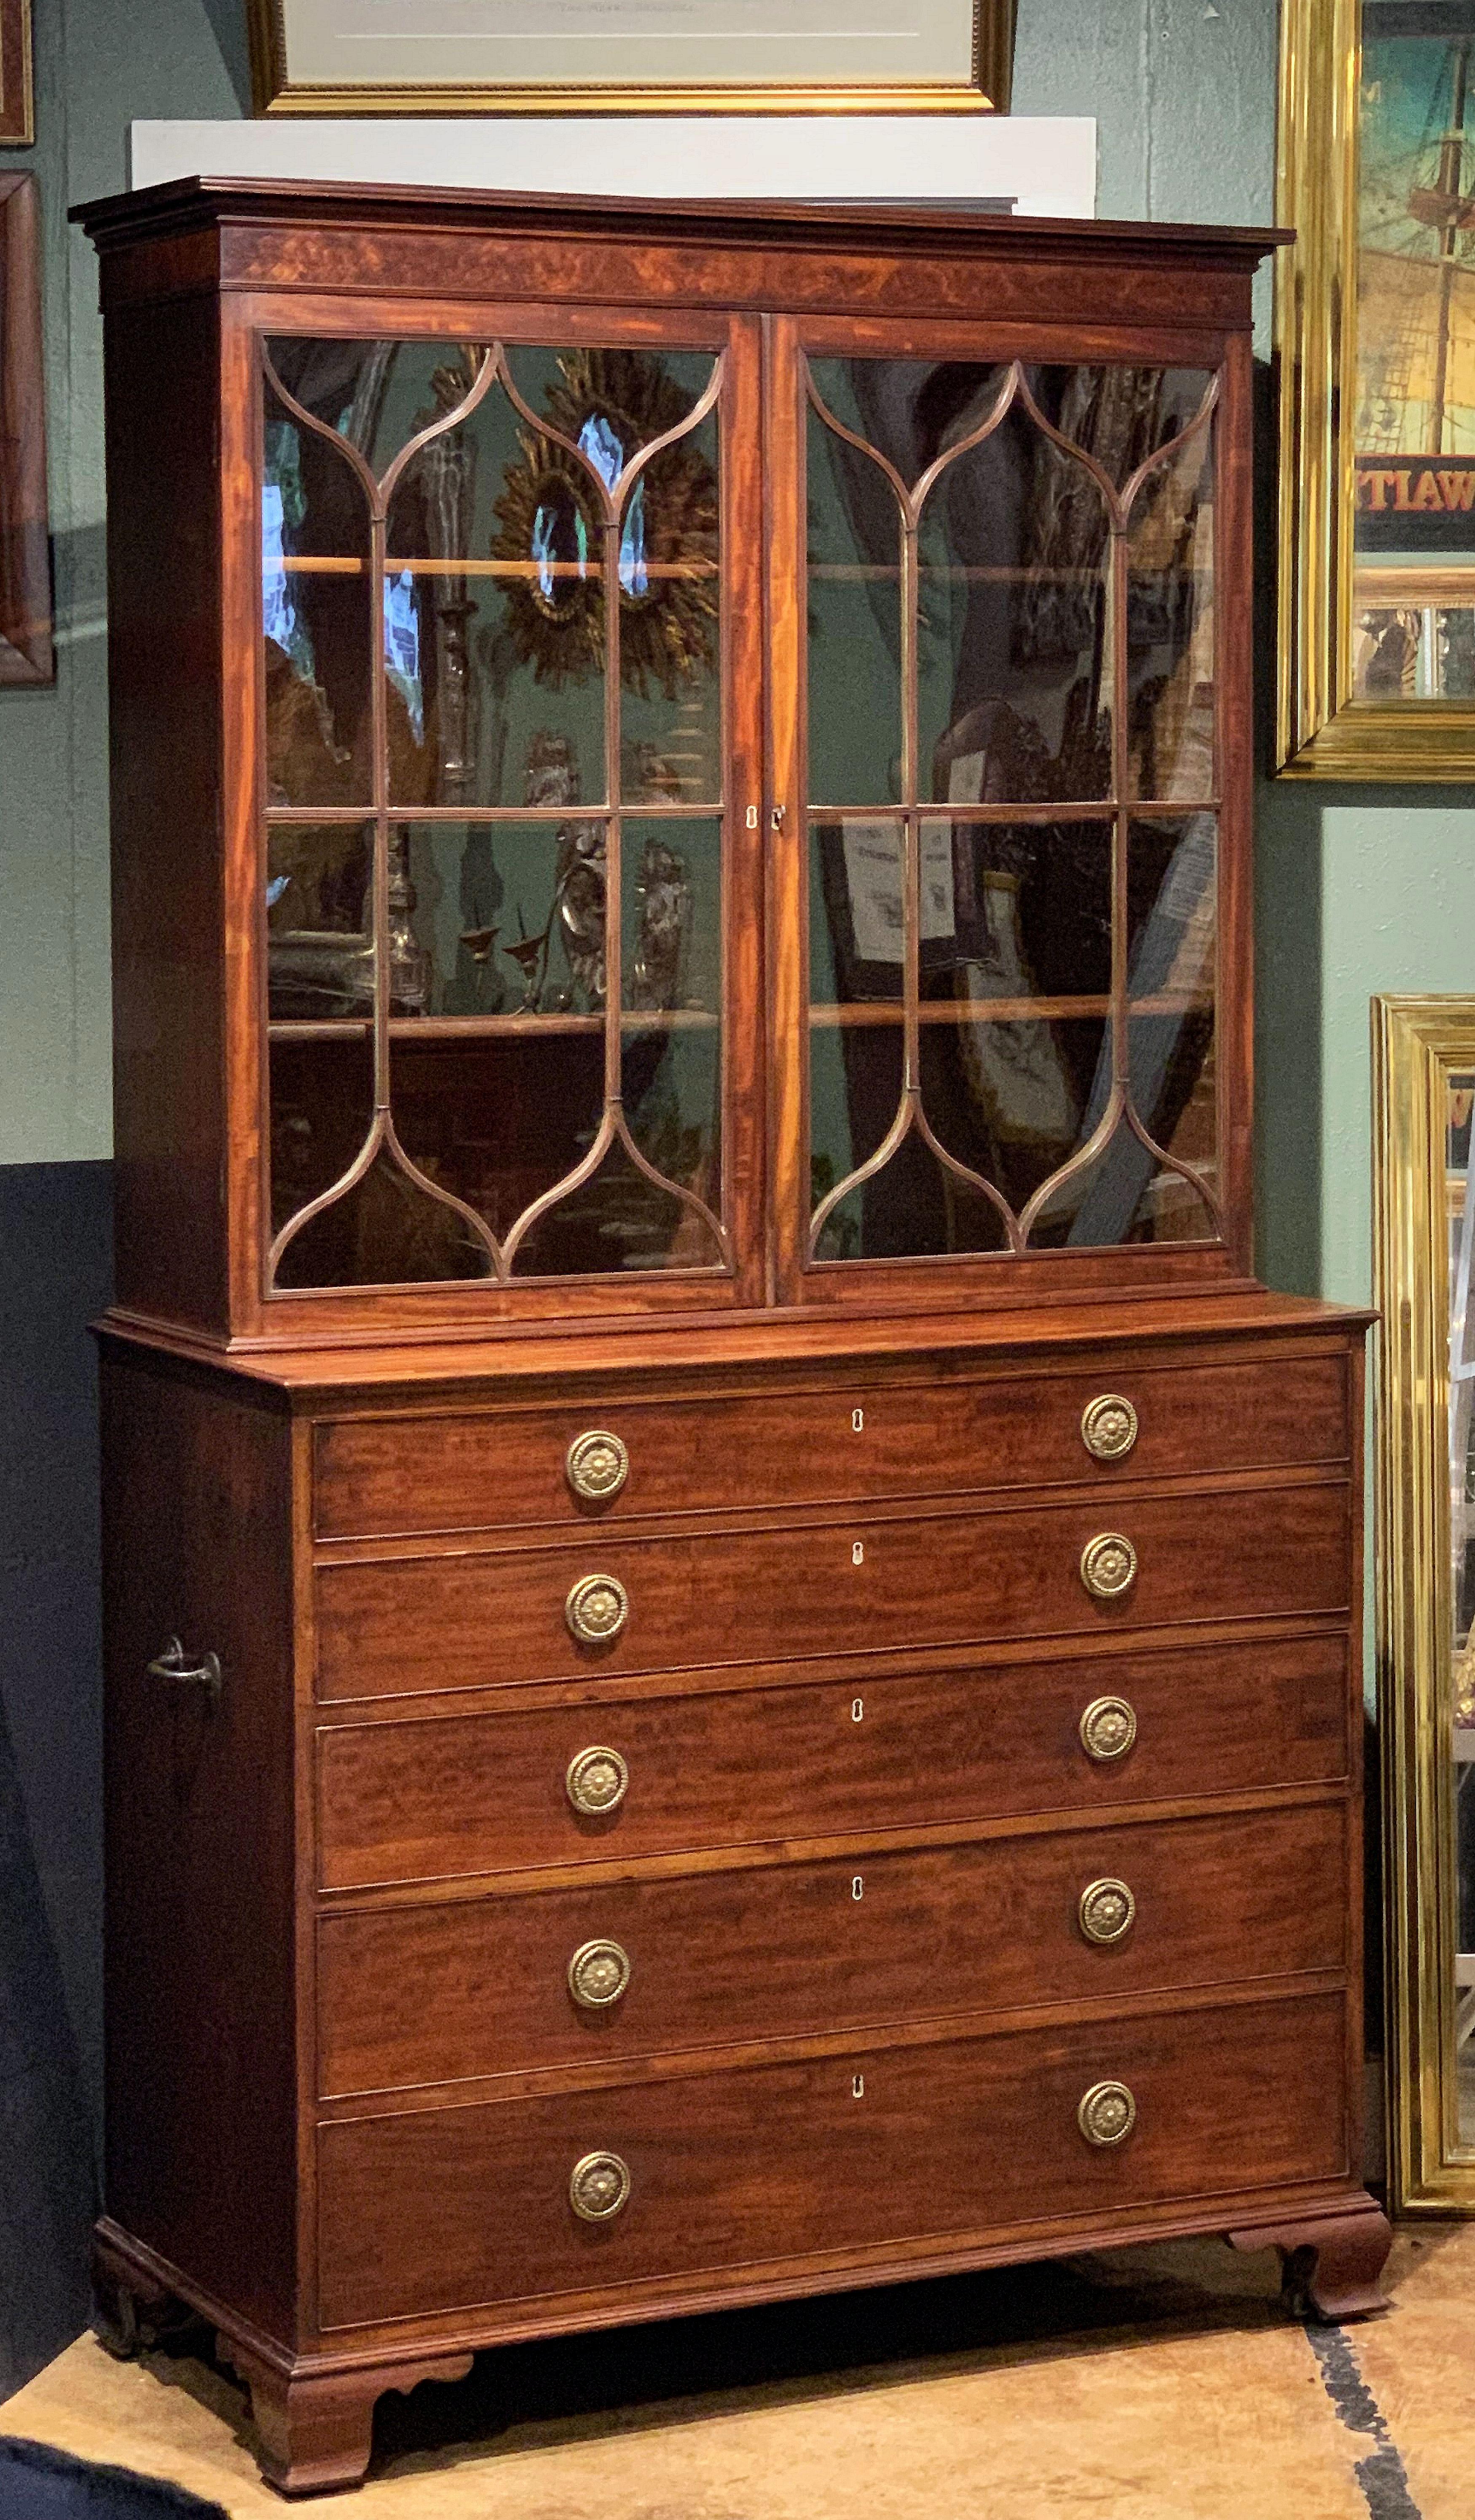 A fine English bureau bookcase or secretary (secretaire) of mahogany from the Georgian era.
The upper section featuring a shaped cornice and two astragal or lattice glass doors enclosing three adjustable shelves.
Set upon a bottom tier with fall